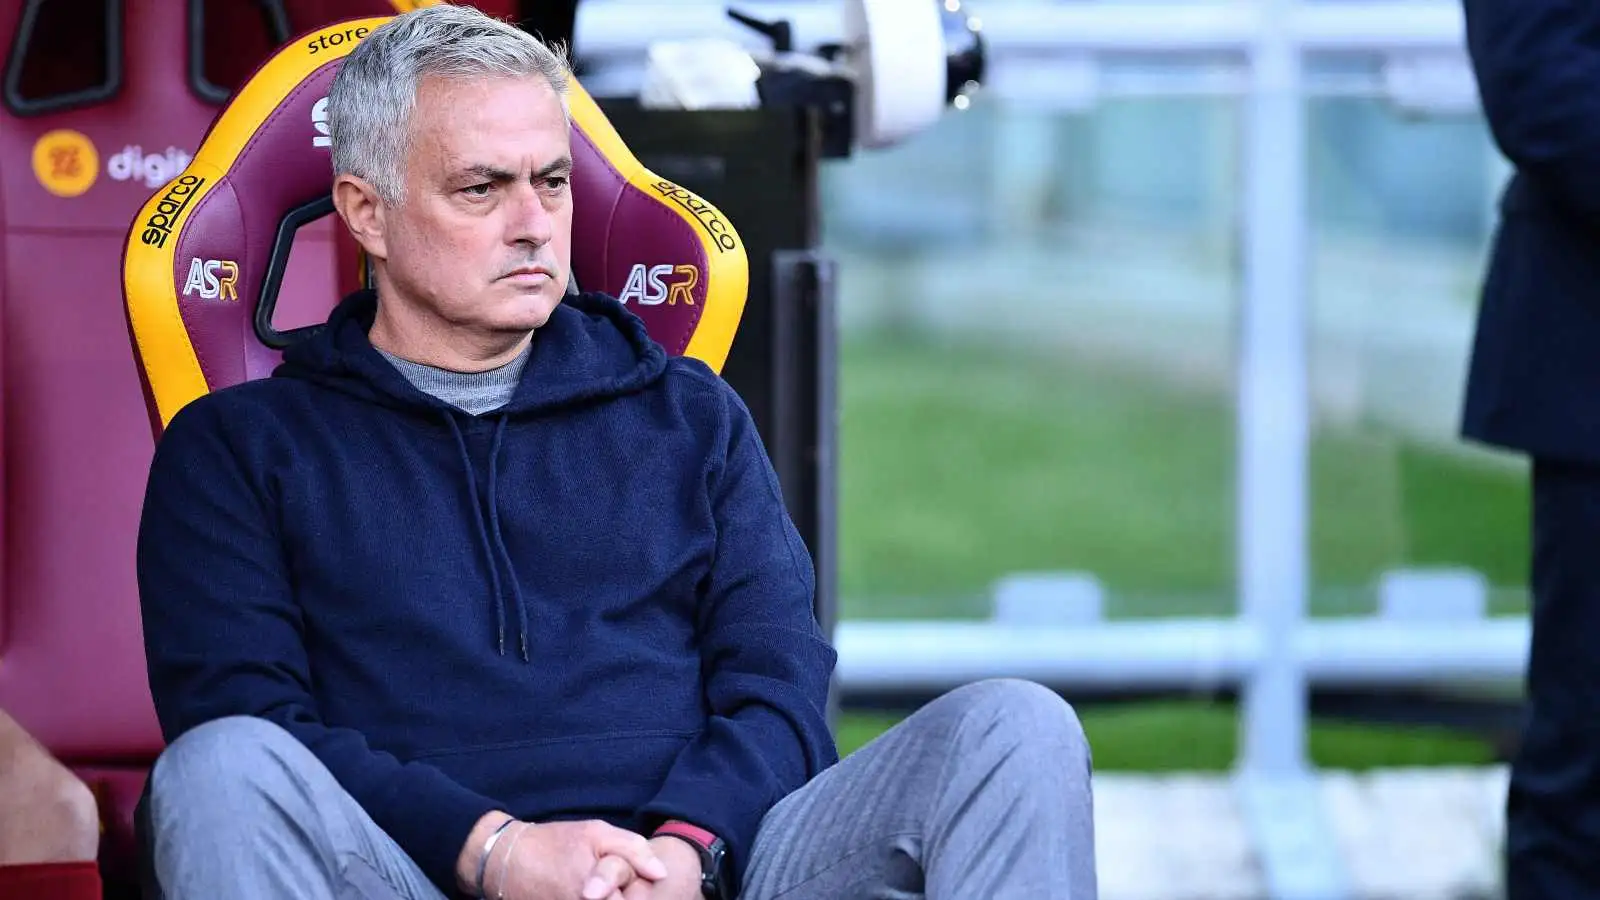 Jose Mourinho sat on the bench before a game